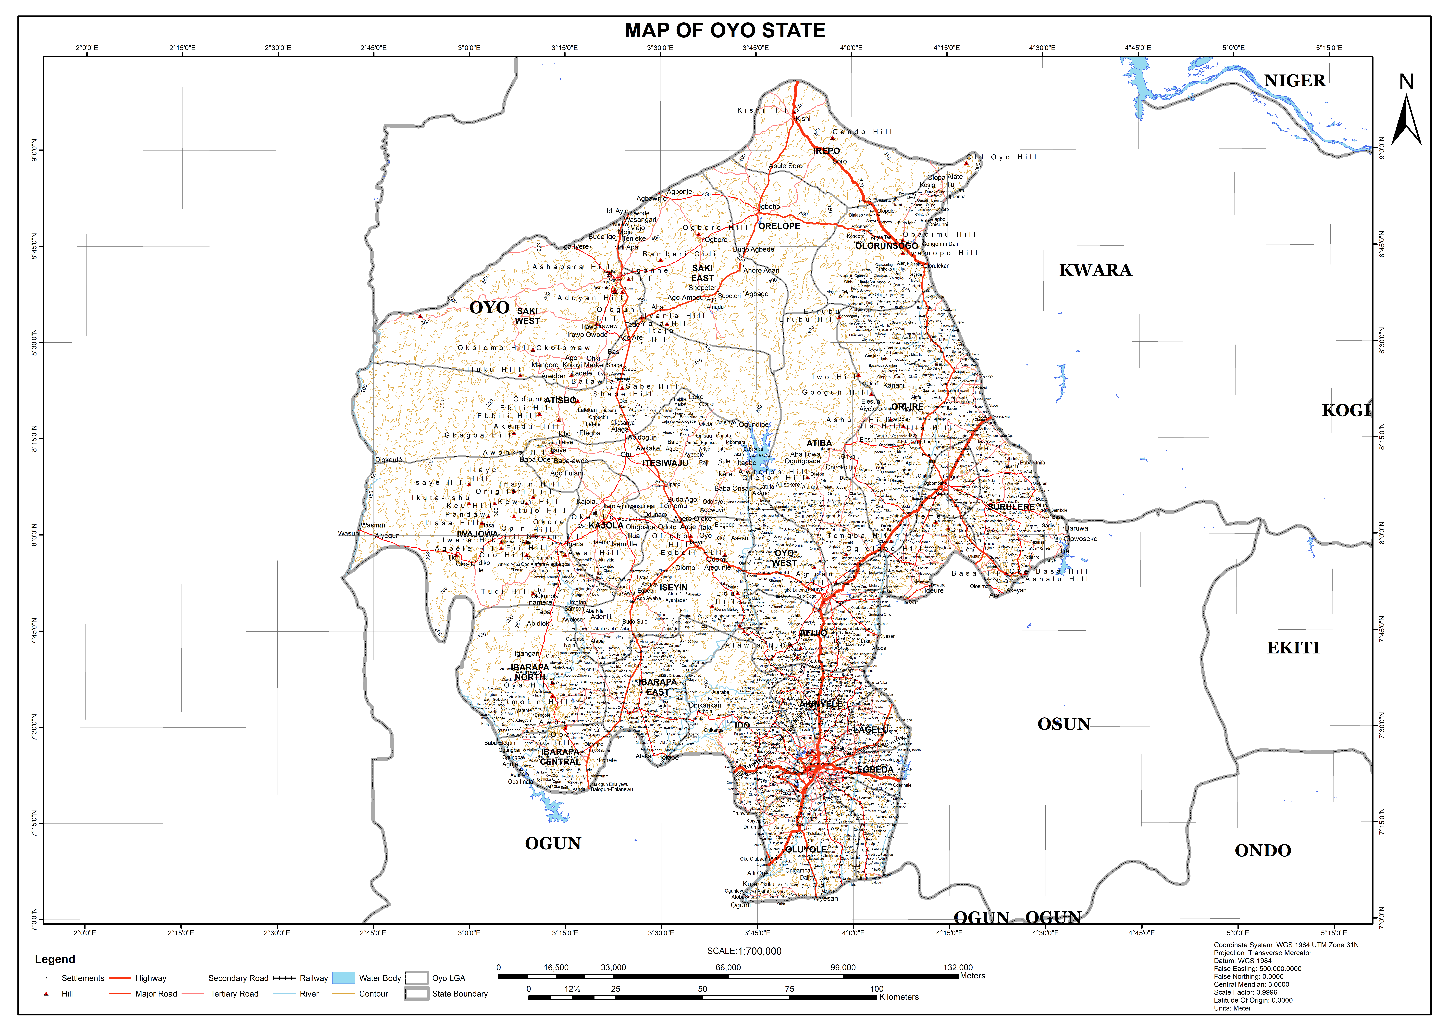 Topographic Mapping of Oyo State